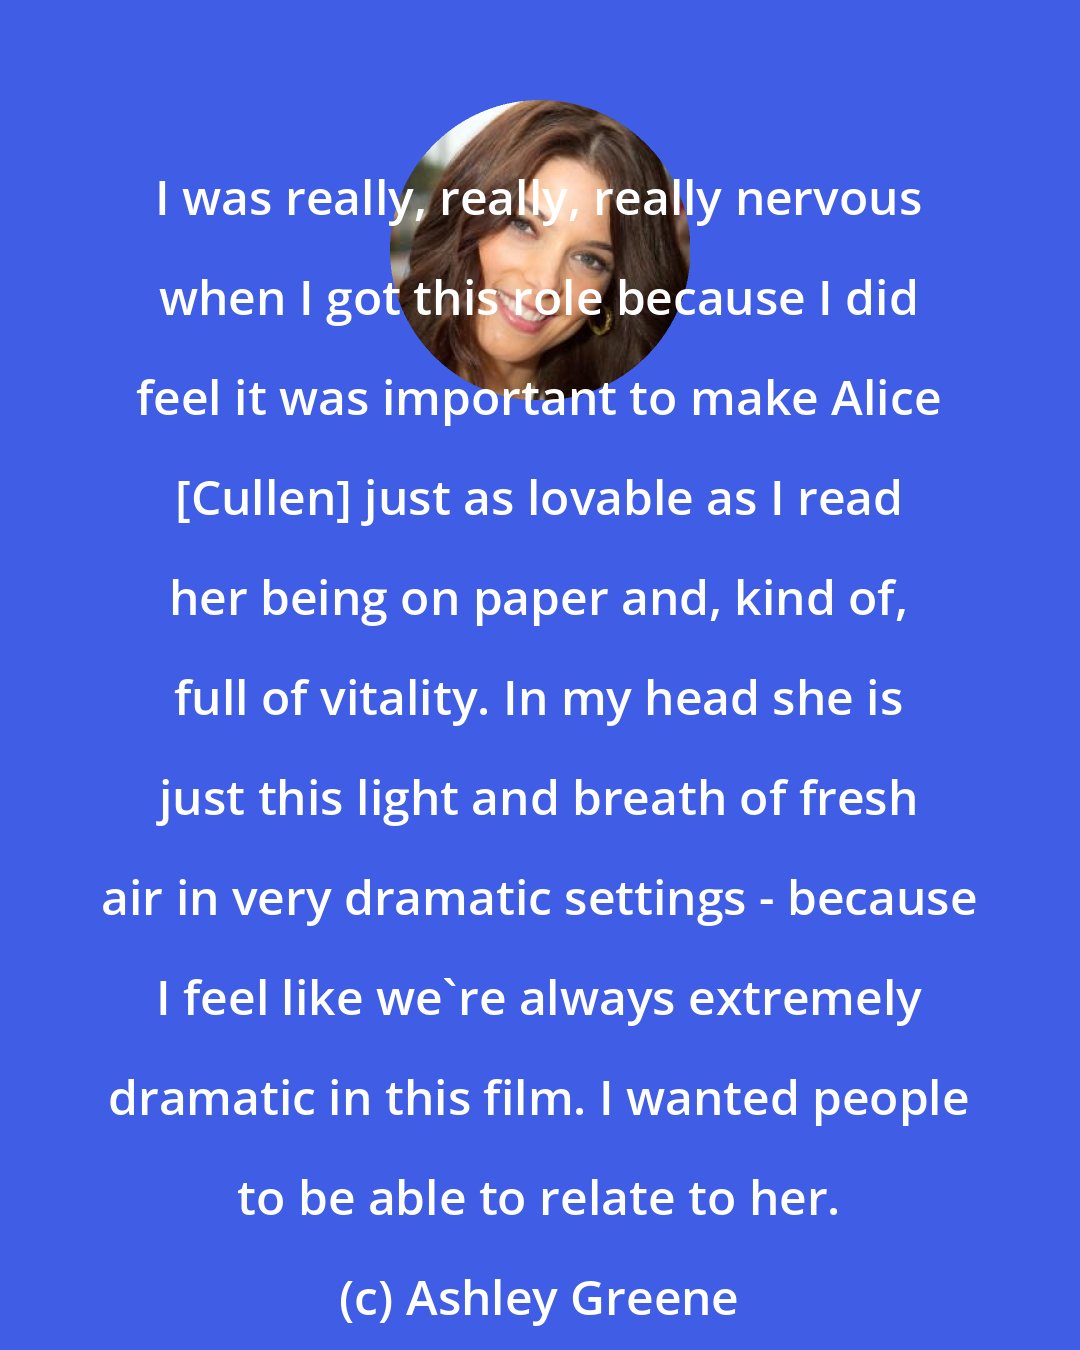 Ashley Greene: I was really, really, really nervous when I got this role because I did feel it was important to make Alice [Cullen] just as lovable as I read her being on paper and, kind of, full of vitality. In my head she is just this light and breath of fresh air in very dramatic settings - because I feel like we're always extremely dramatic in this film. I wanted people to be able to relate to her.